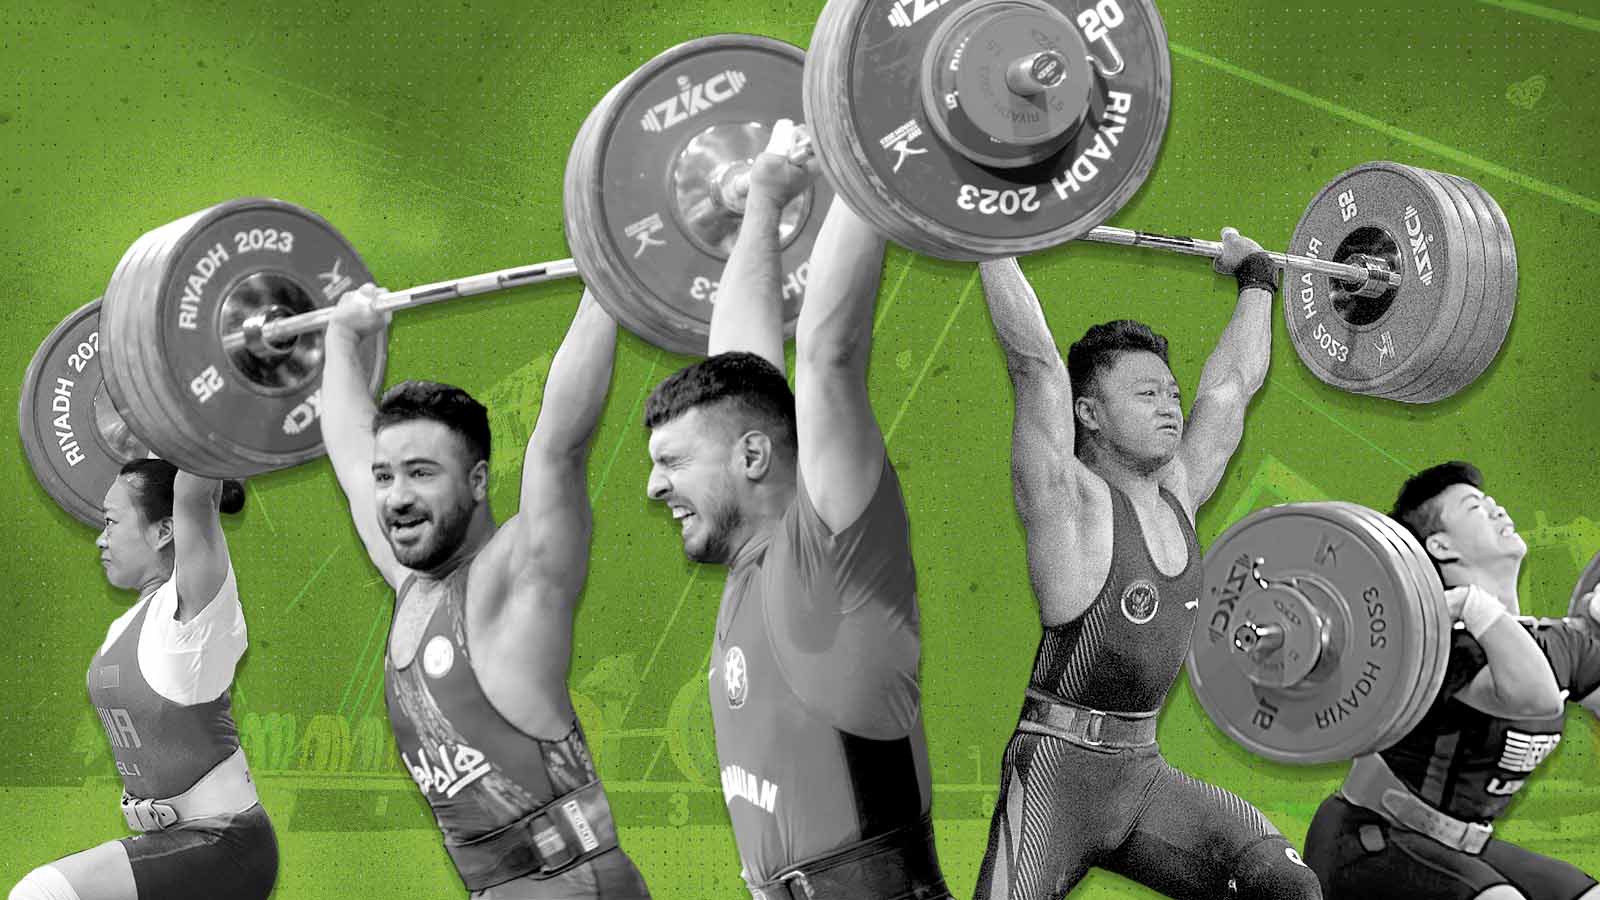 2017 IWF World Weightlifting Championships in the USA — Cobra Weightlifting